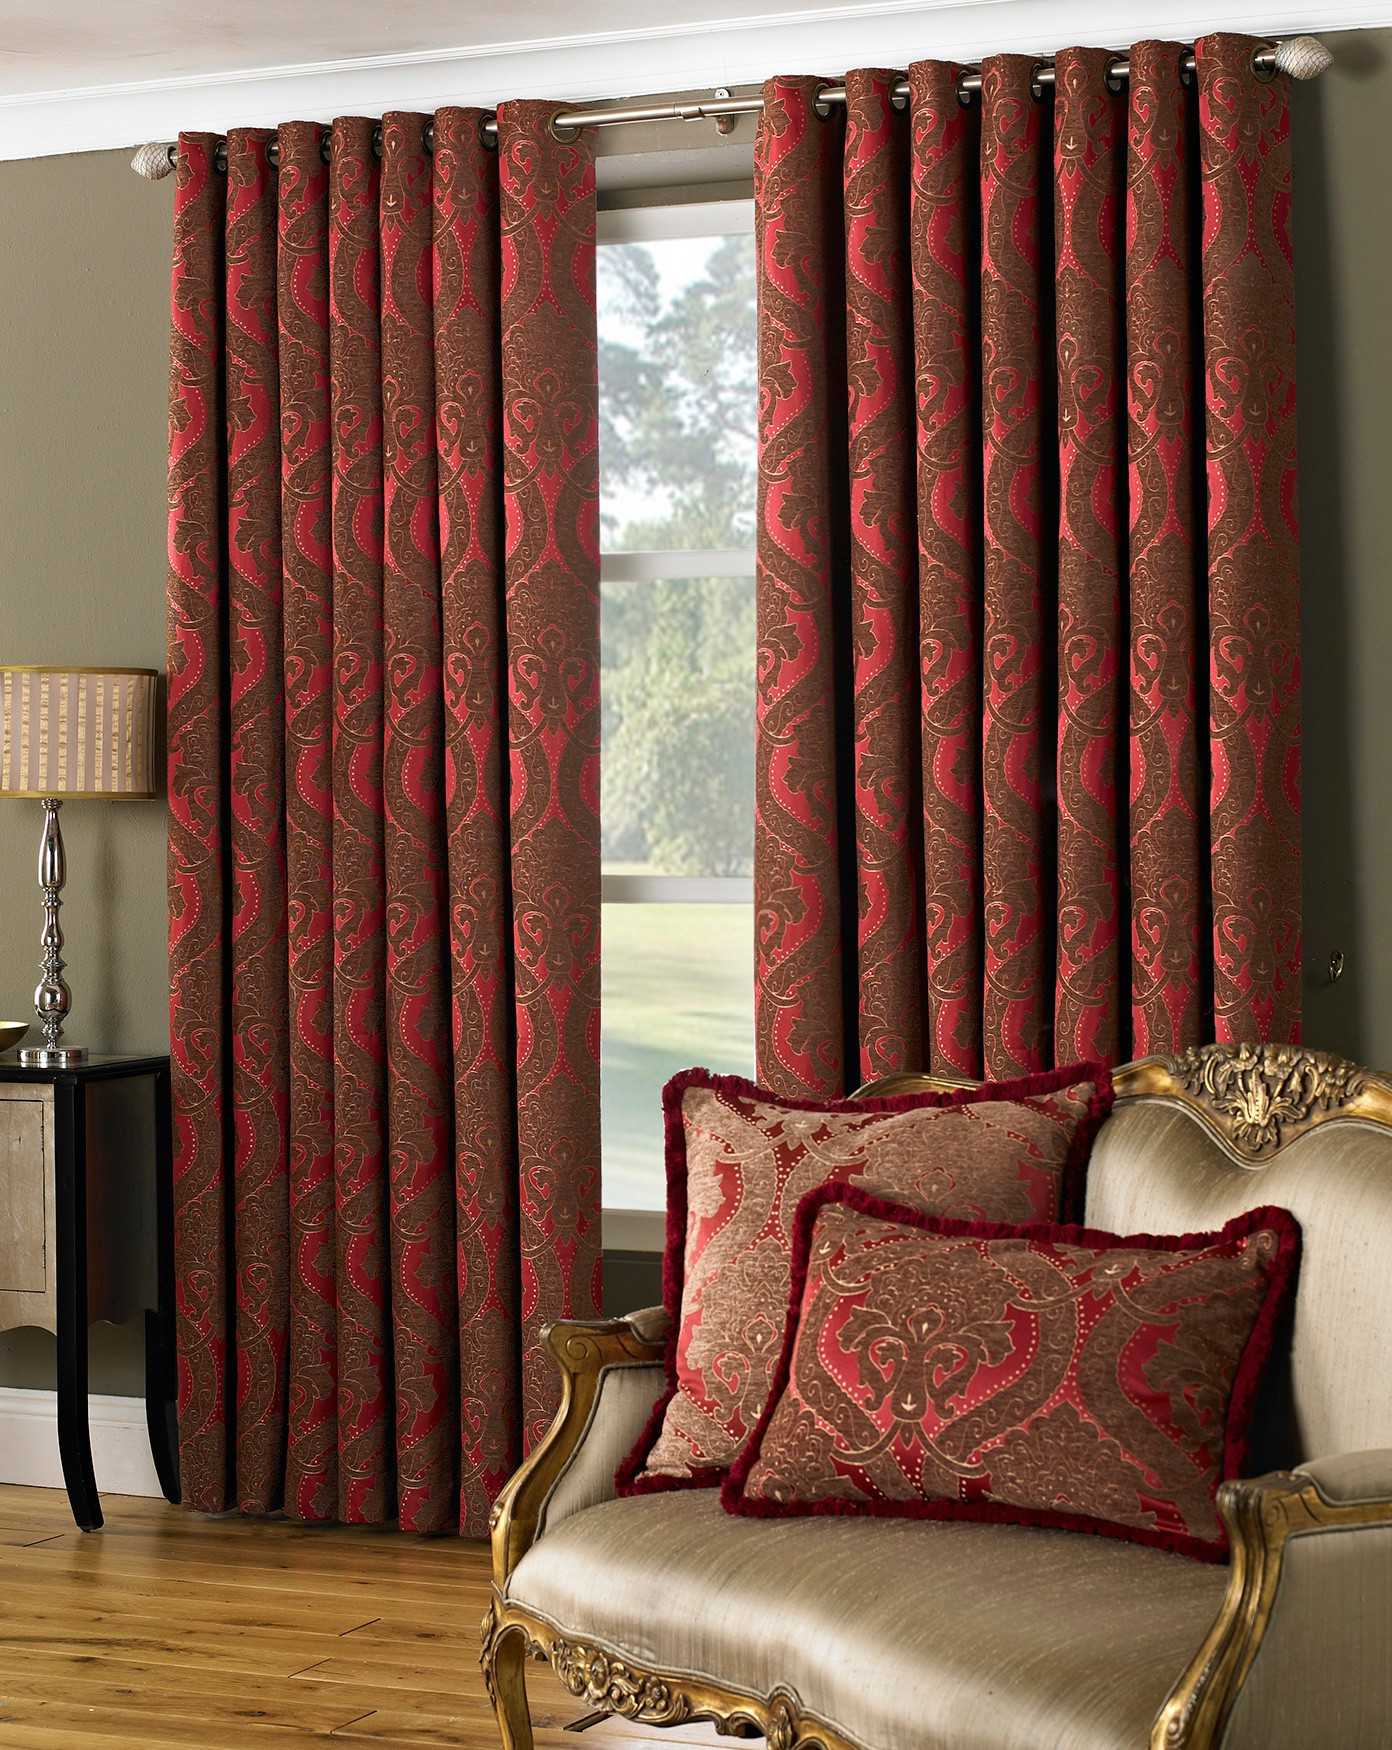 Living Room Curtains Design
 Burgundy Curtains for Living Room